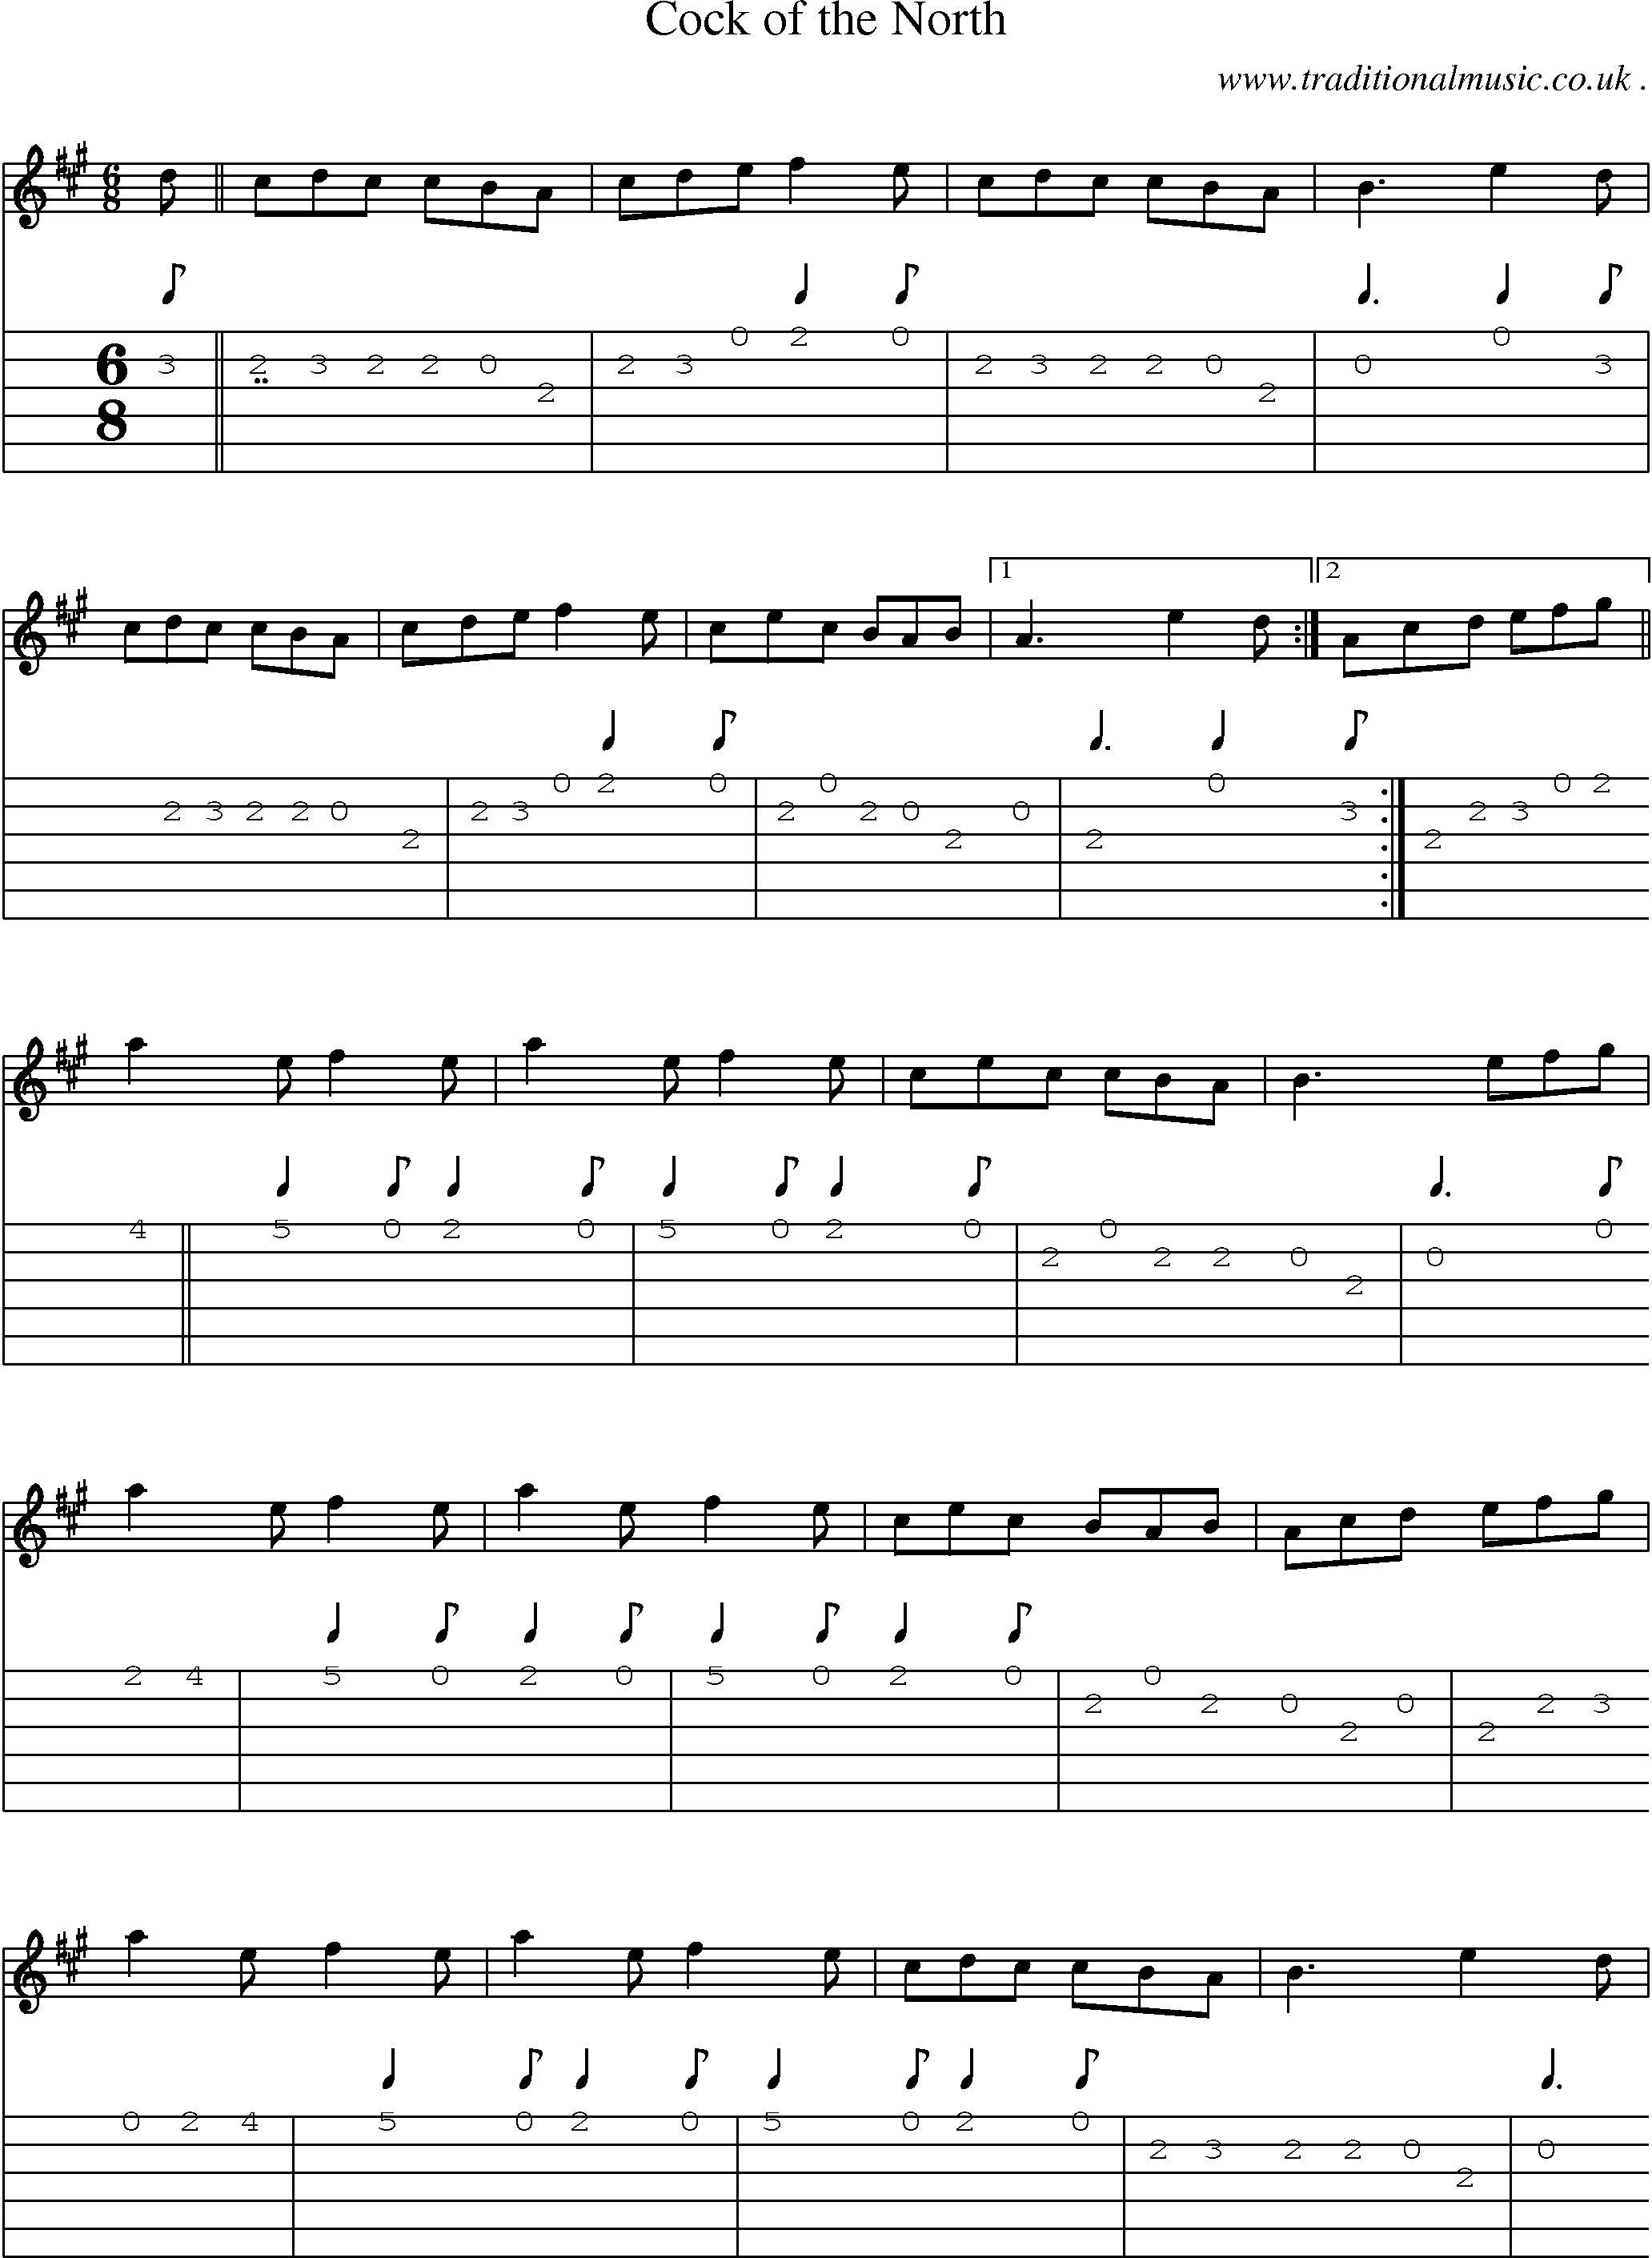 Sheet-music  score, Chords and Guitar Tabs for Cock Of The North